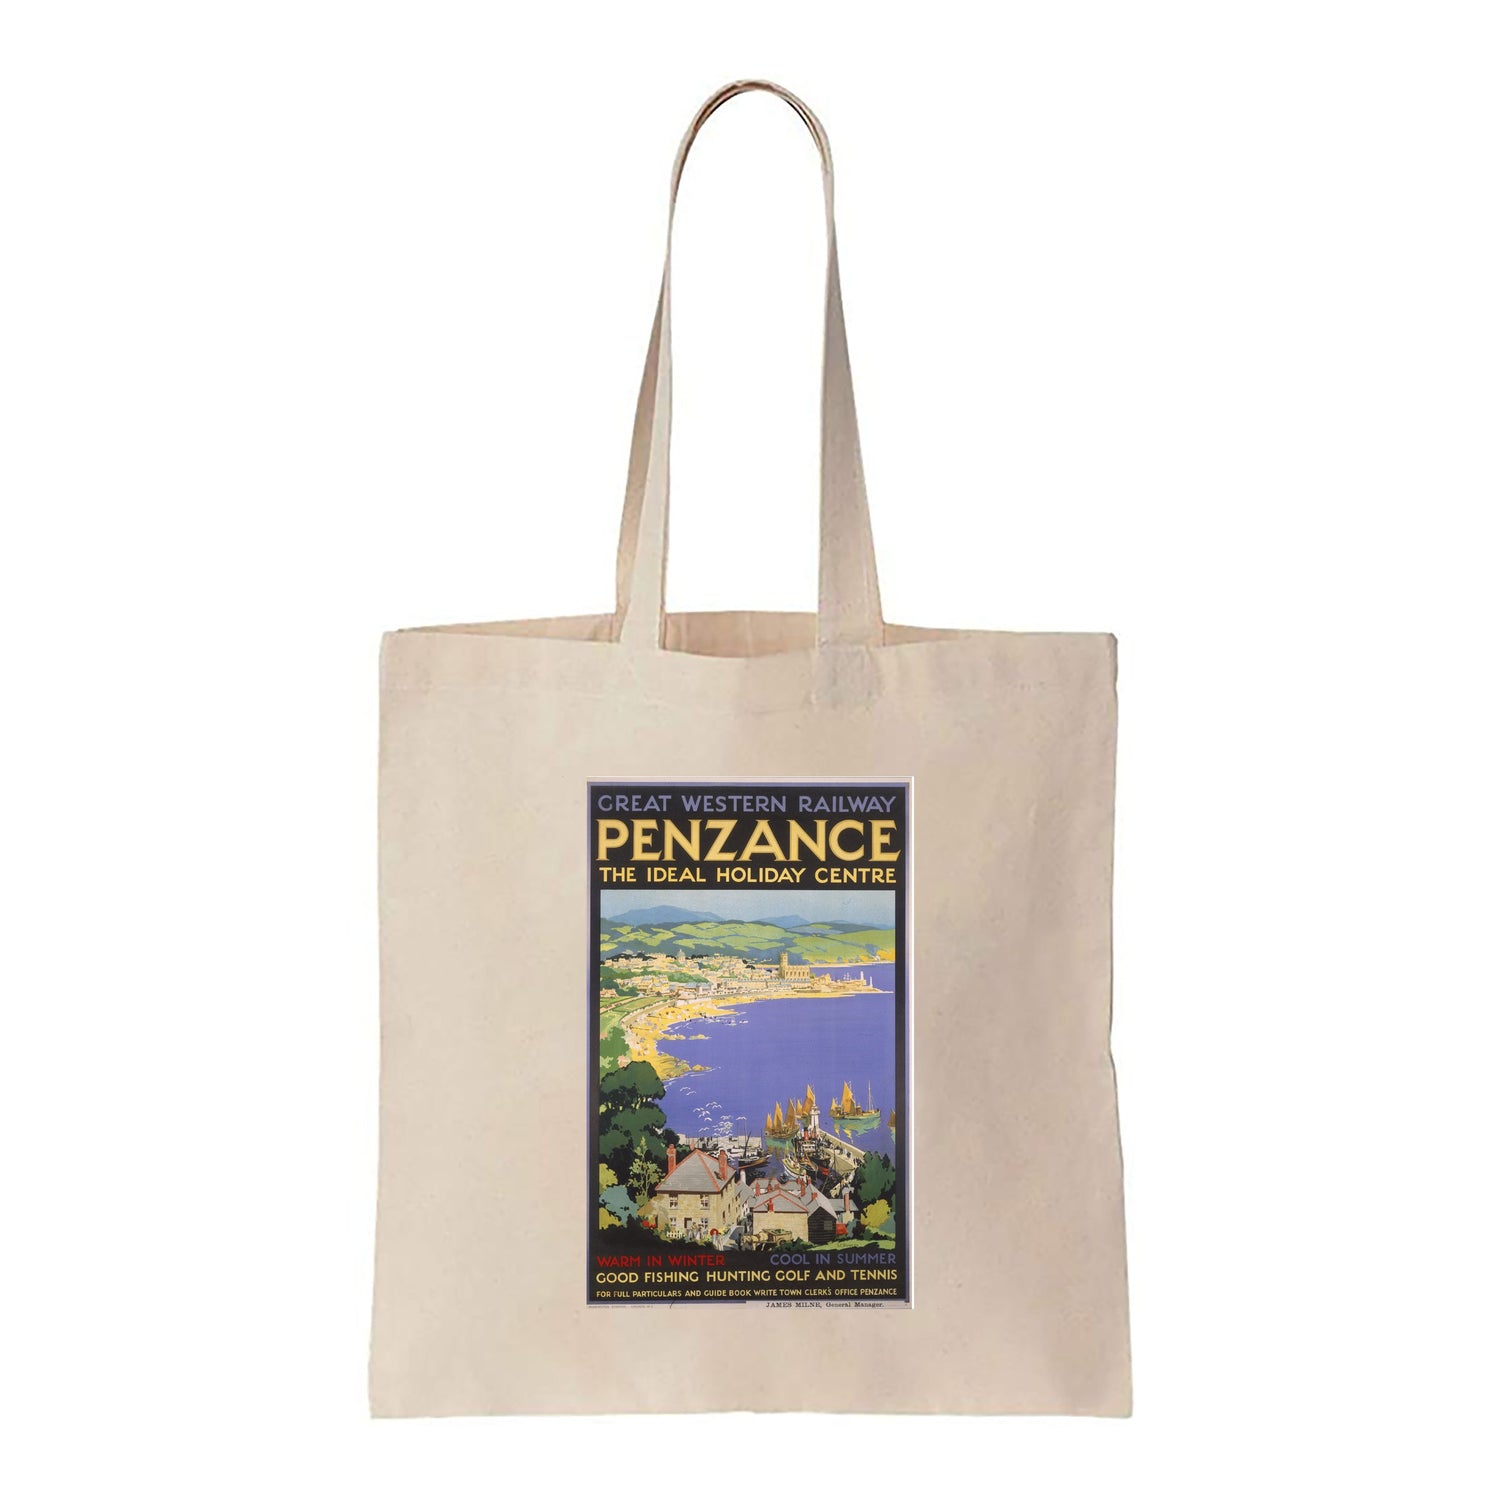 Penzance The Ideal Holiday Centre - Canvas Tote Bag